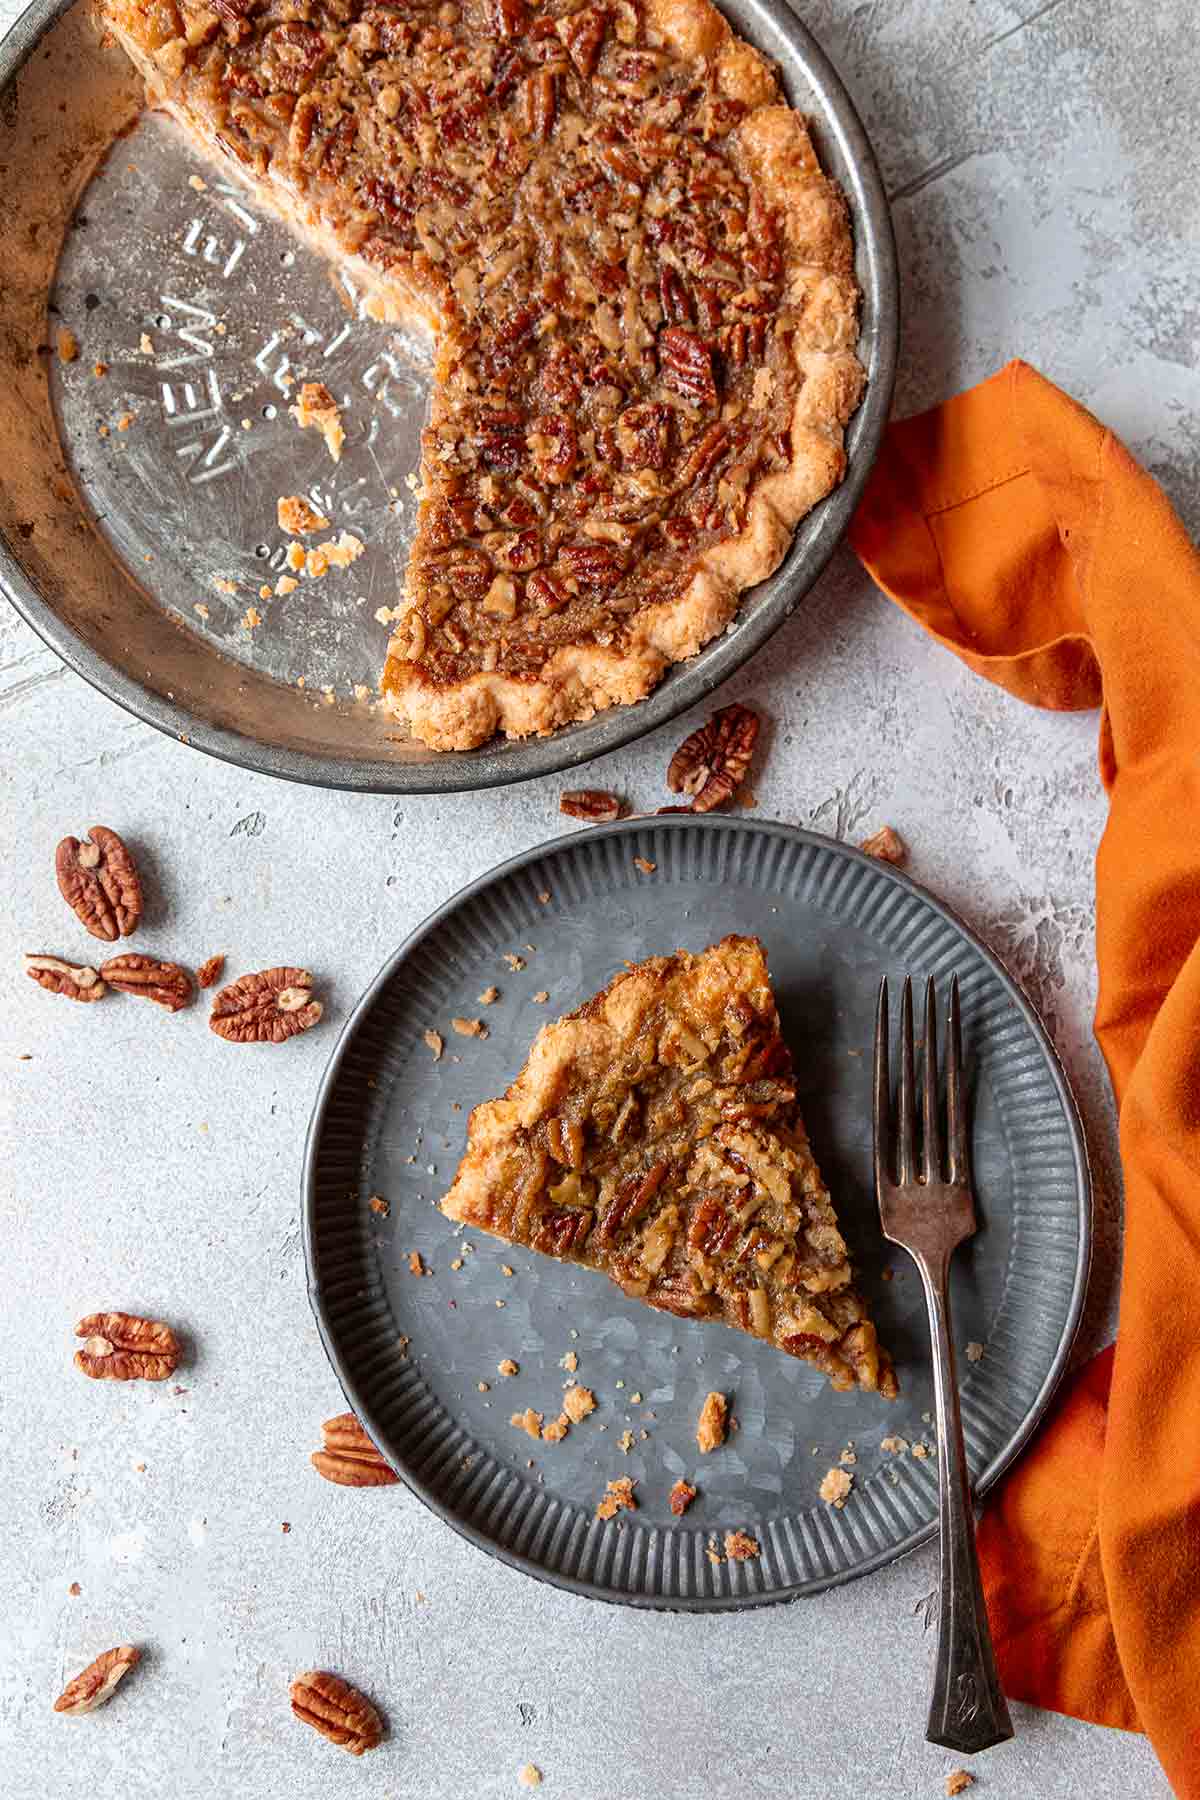 A slice of pumpkin pecan pie on a plate next to a pie plate filled with the remaining pie.